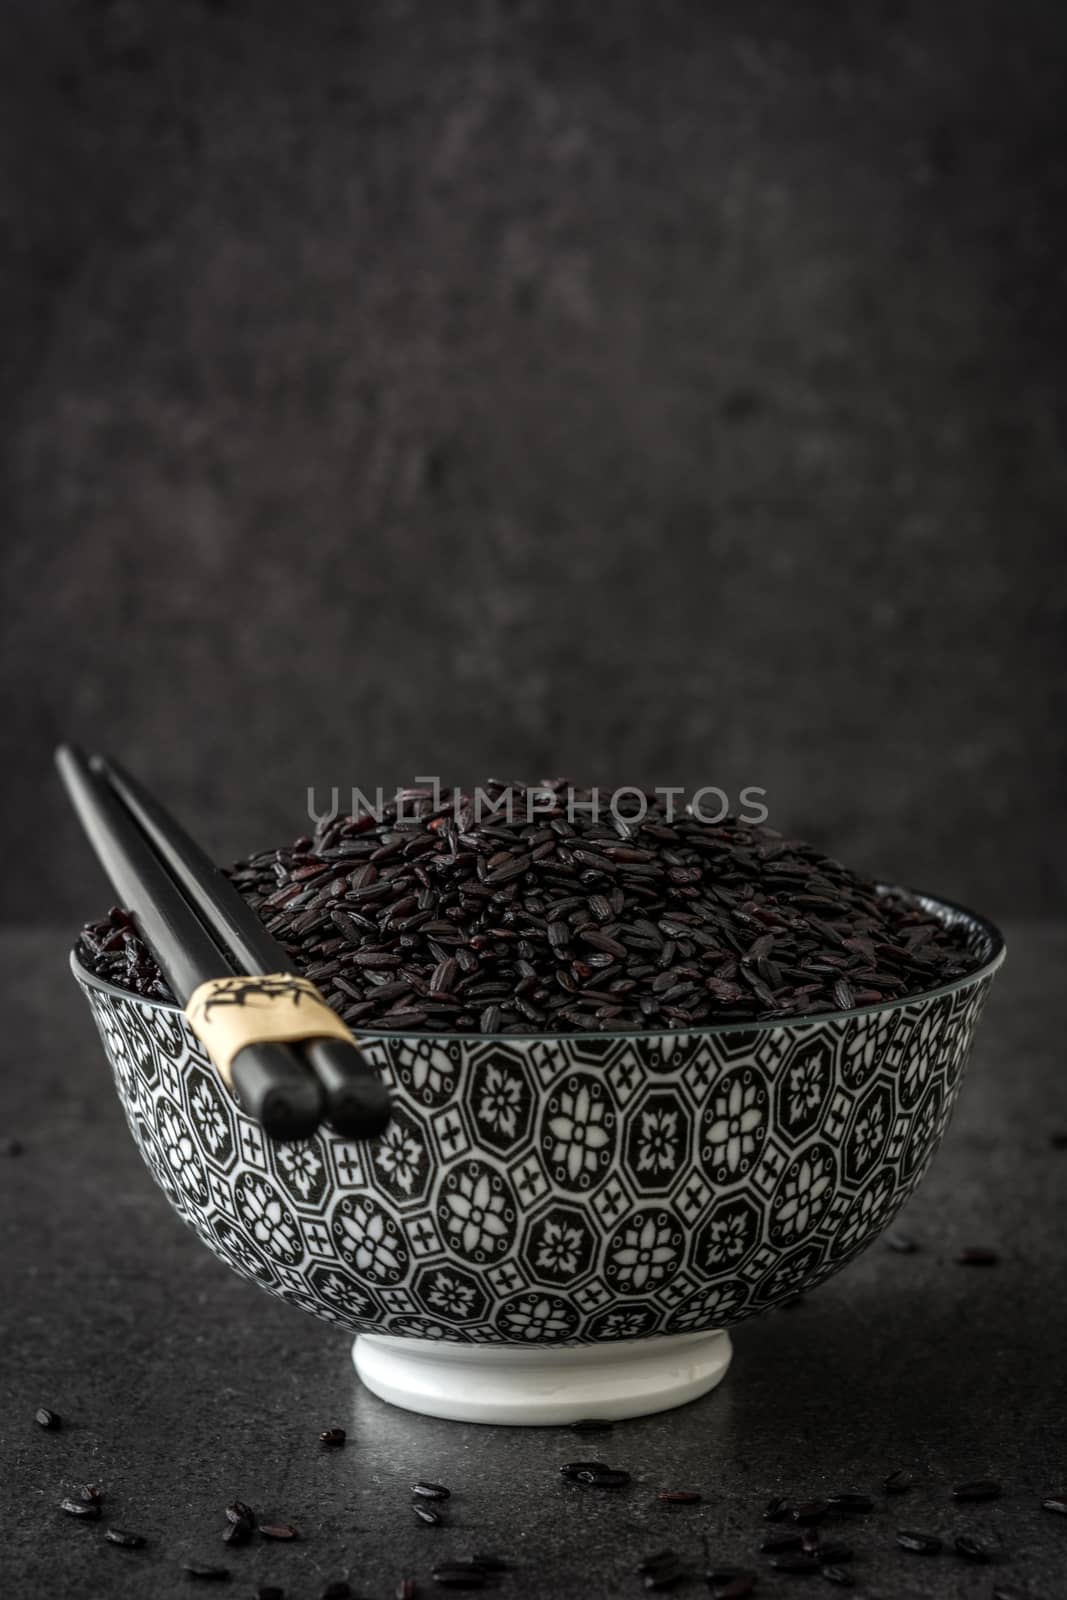 Black rice in a bowl on black background by chandlervid85